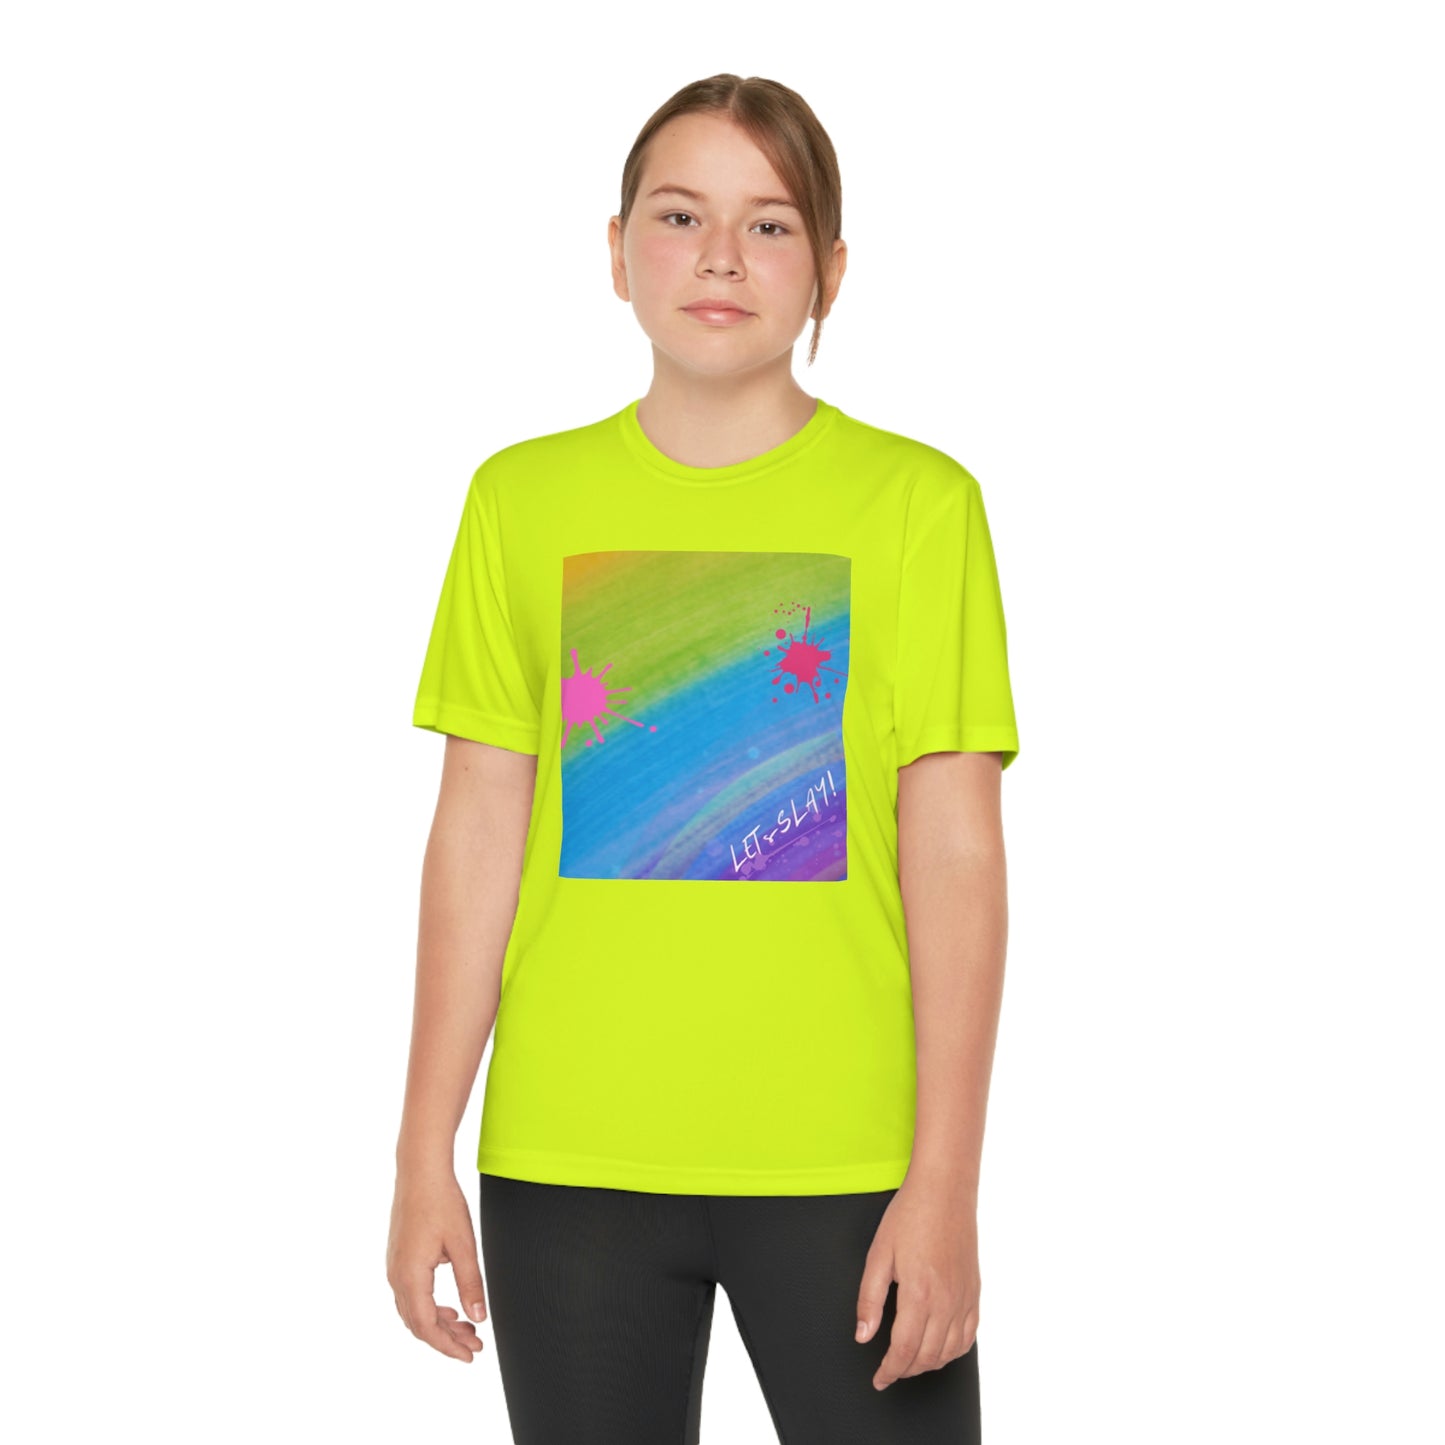 Let's Slay! Youth Competitor Tee